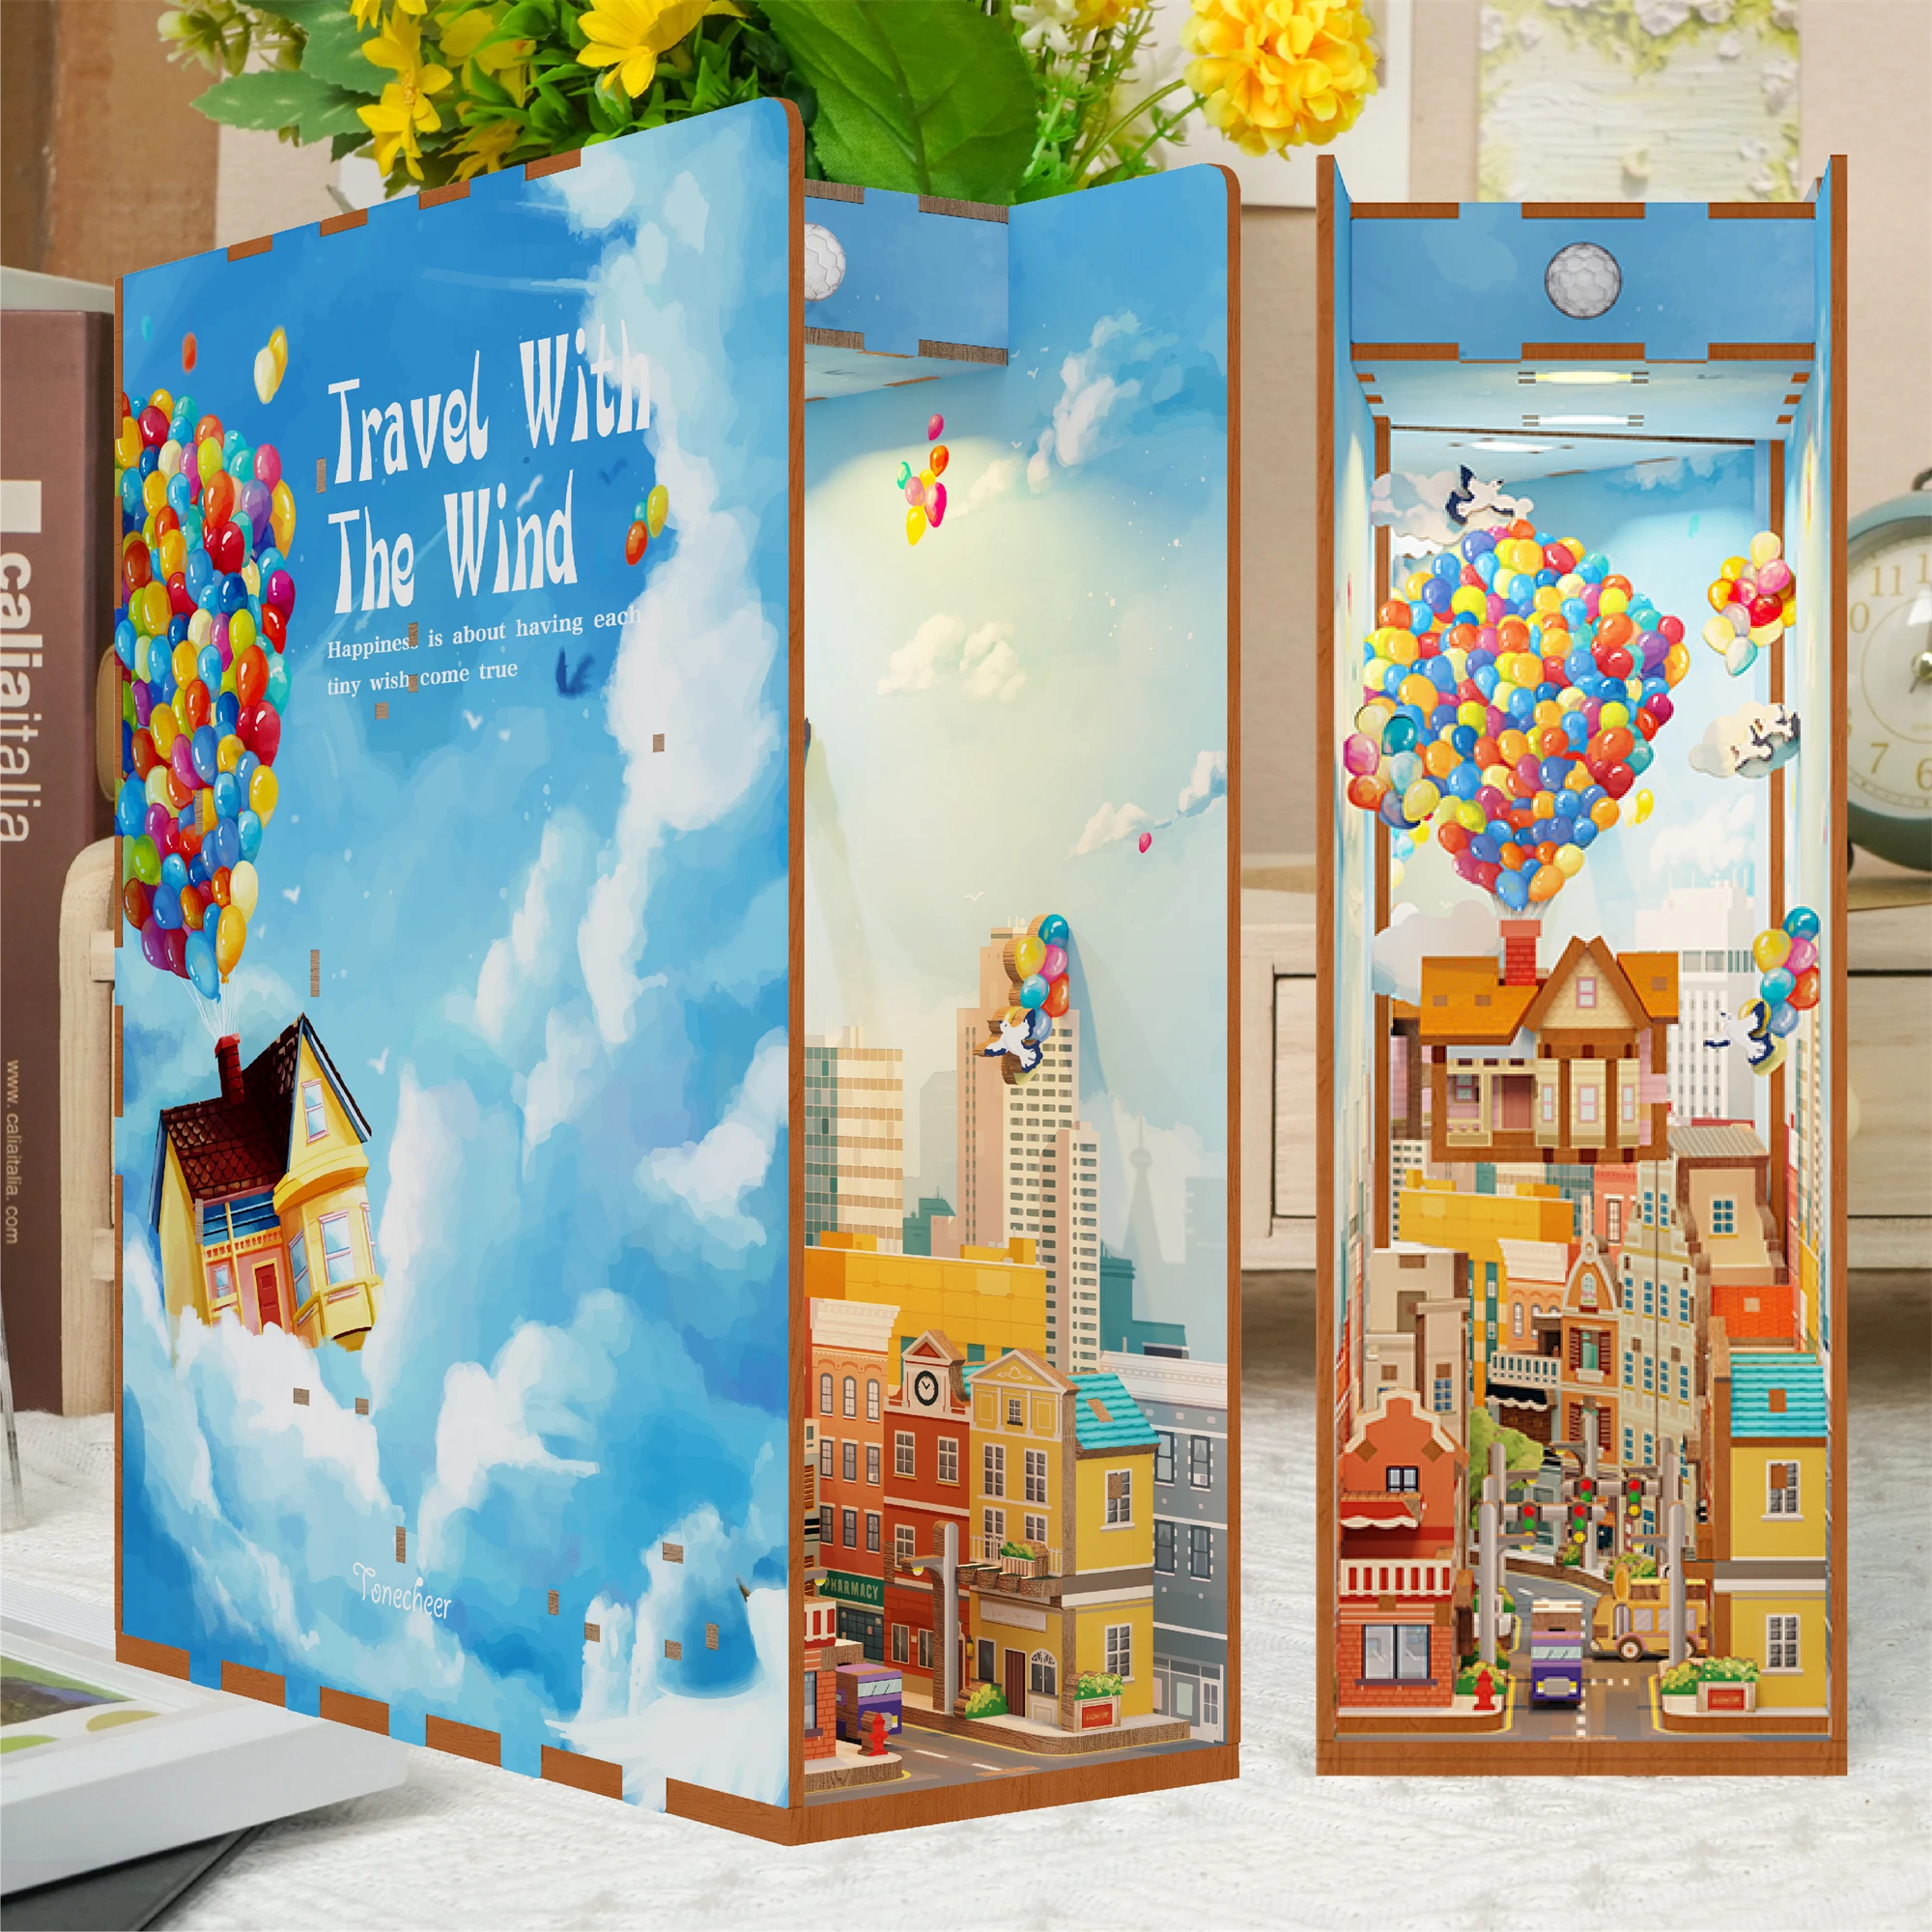 

Tonecheer Travel With The Wind Diy Books Bookshelf Insert children's 3d wooden puzzle Book Nook with body sensor led light